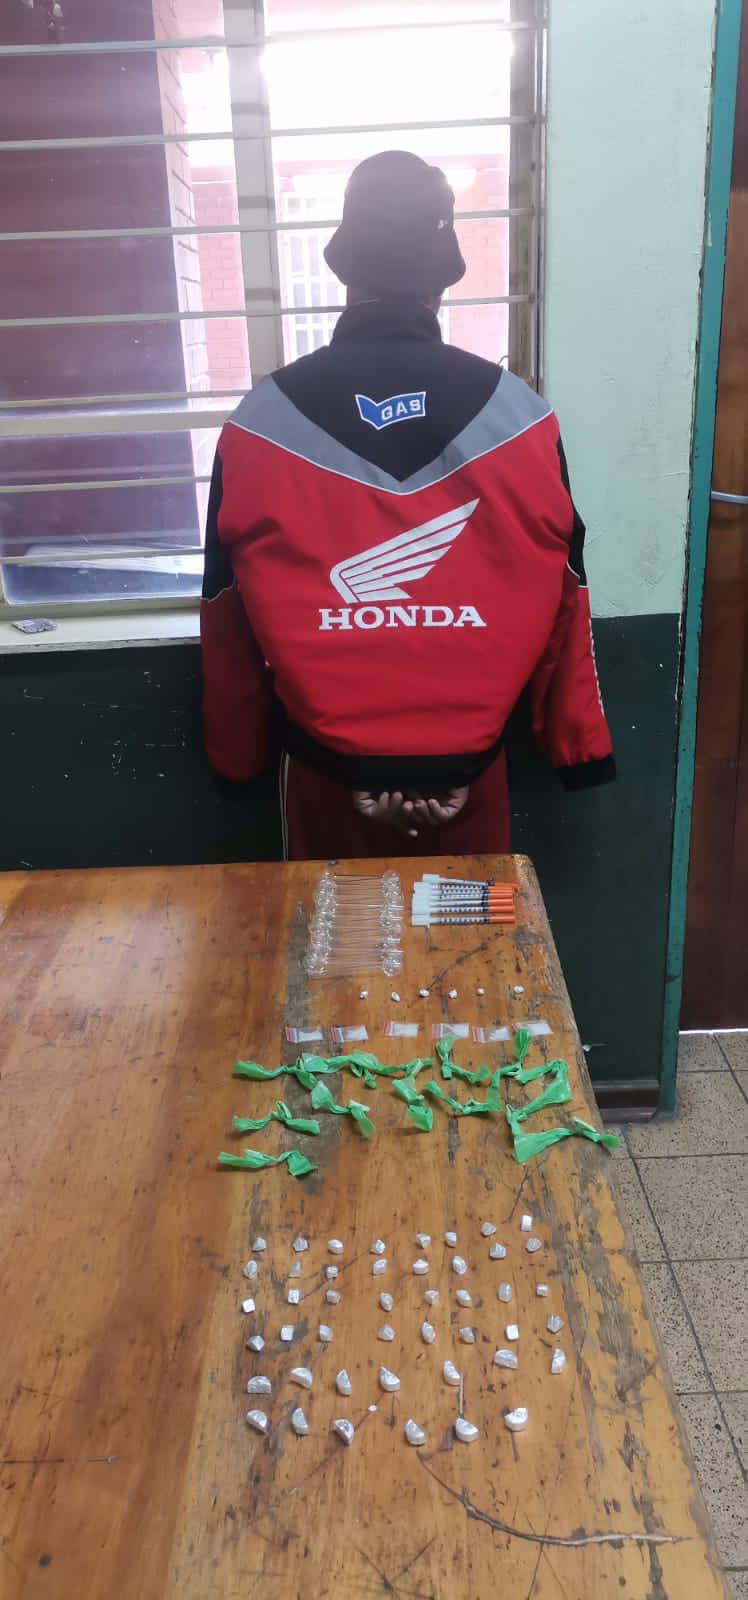 Suspect arrested on charges of possession and possible dealing of illegal substances, Germiston